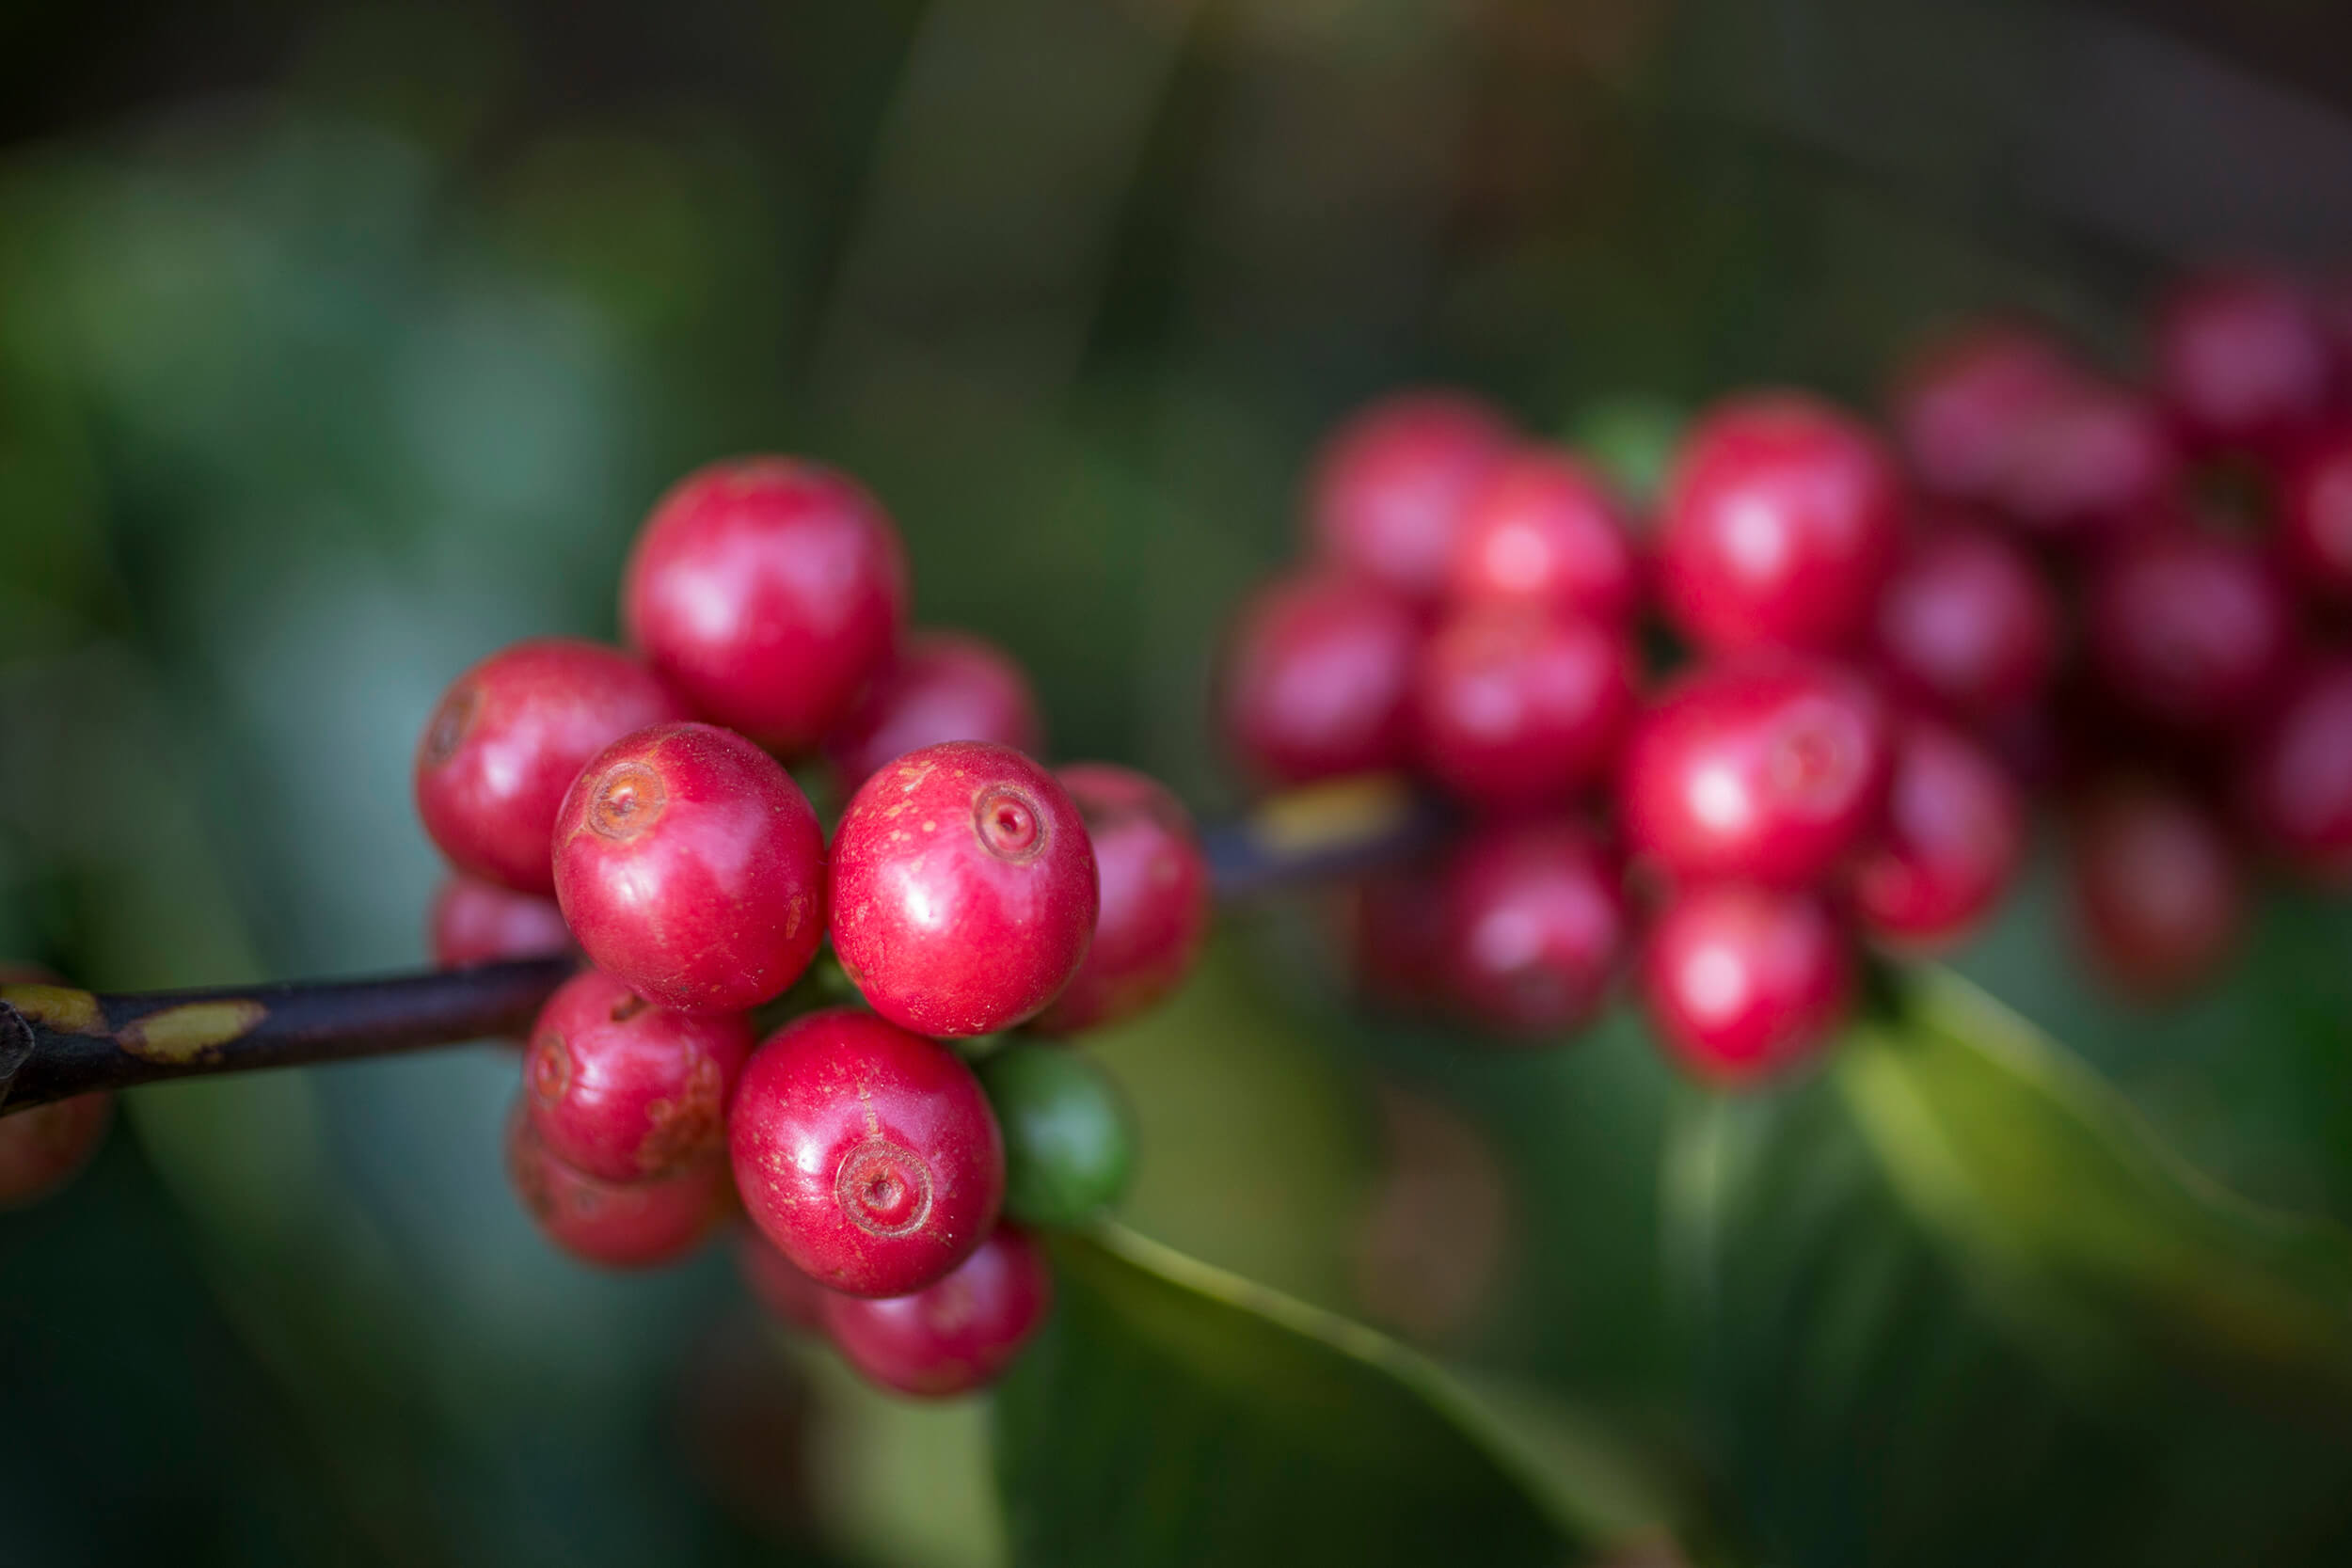  Mature coffee sherries of the red bourbon variety from Brazil. 